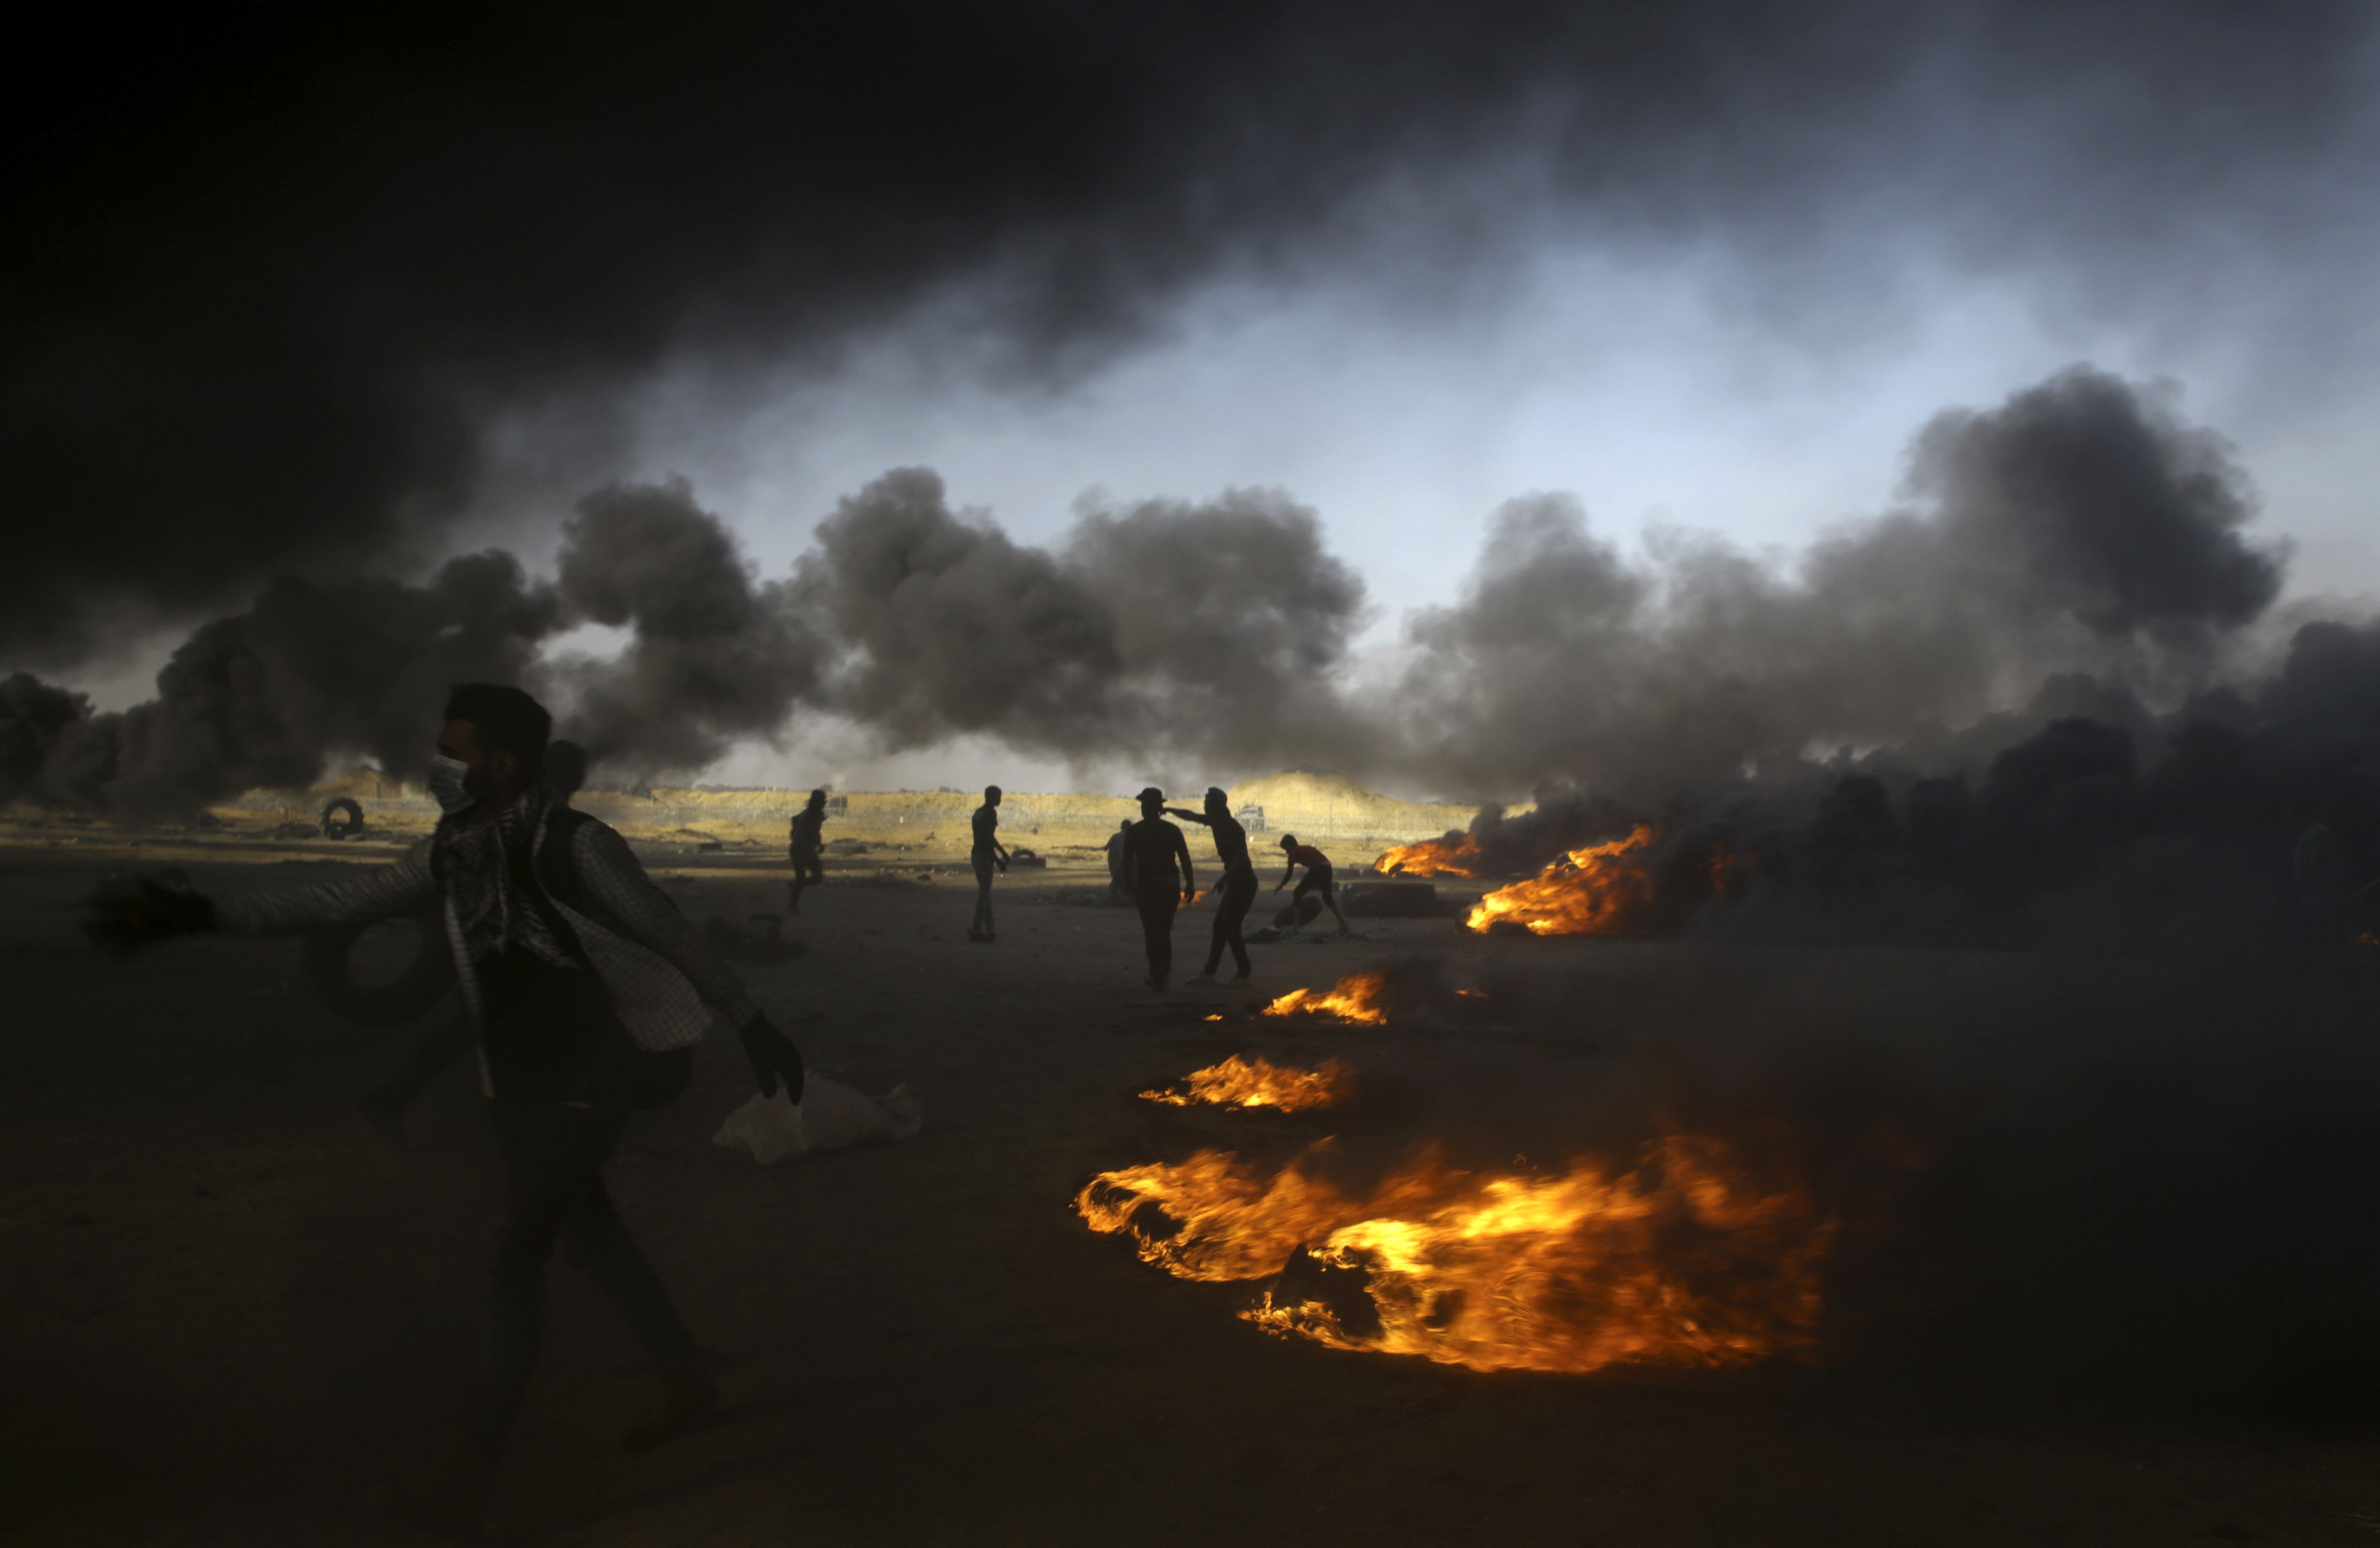 Palestinian protesters burn tires during a protest at the Gaza Strip's border with Israel, east of Khan Younis, Tuesday, May 15, 2018. Israel faced a growing backlash Tuesday and new charges of using excessive force, a day after Israeli troops firing from across a border fence killed dozens of Palestinians and wounded more than 2,700 at a mass protest in Gaza. (AP Photo/Adel Hana)